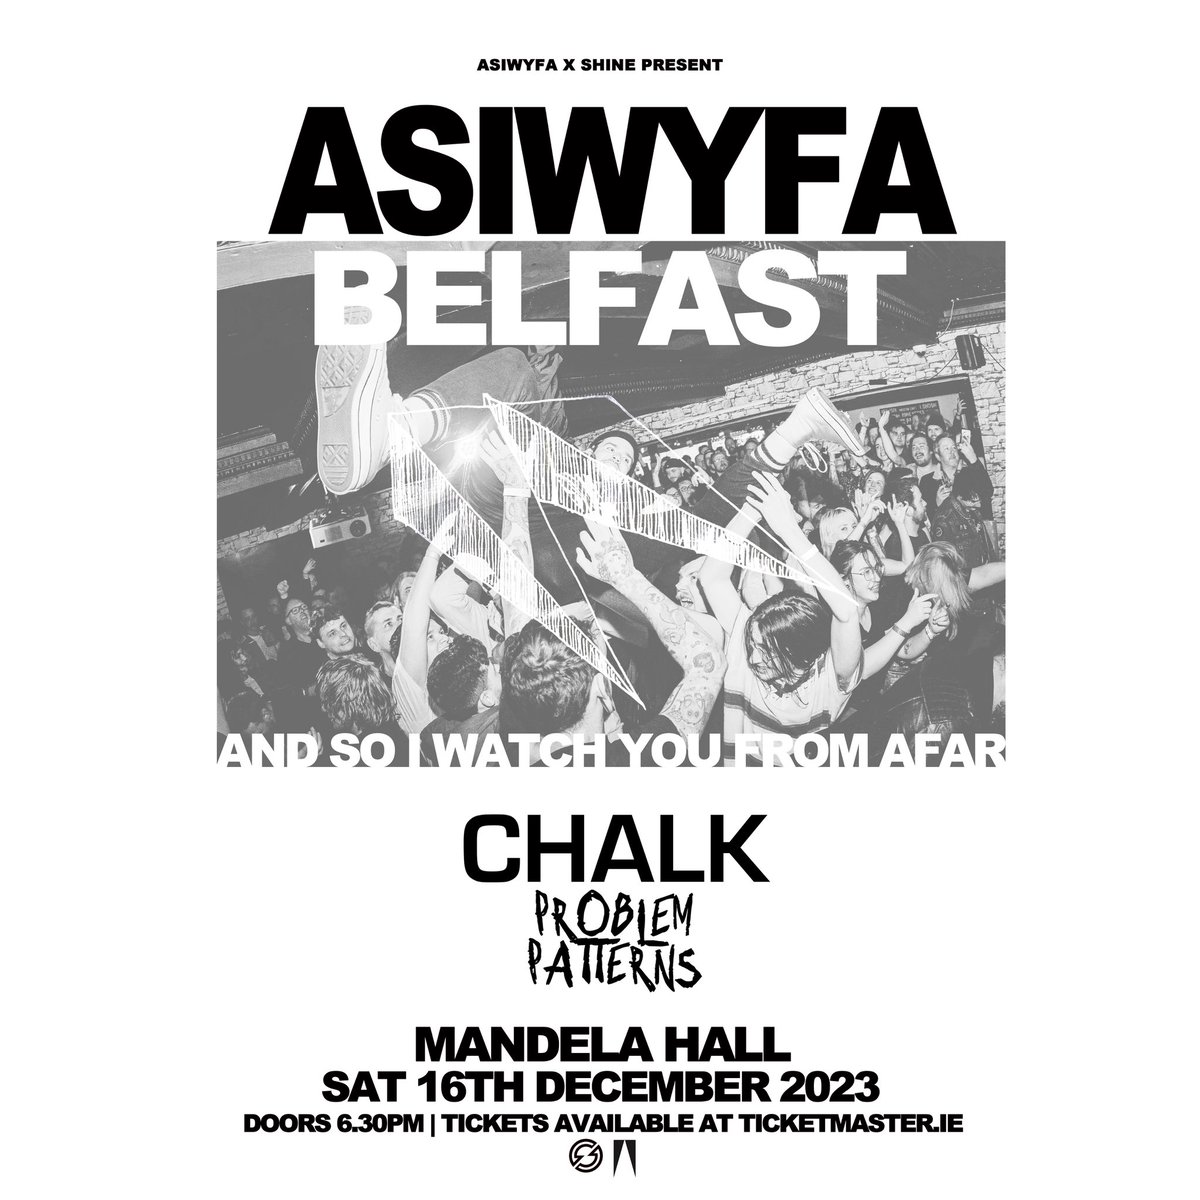 Killer supports announced for our hometown show!! @chalk_band + @probpatterns Don’t sit on this! Tickets here: asiwyfa.com